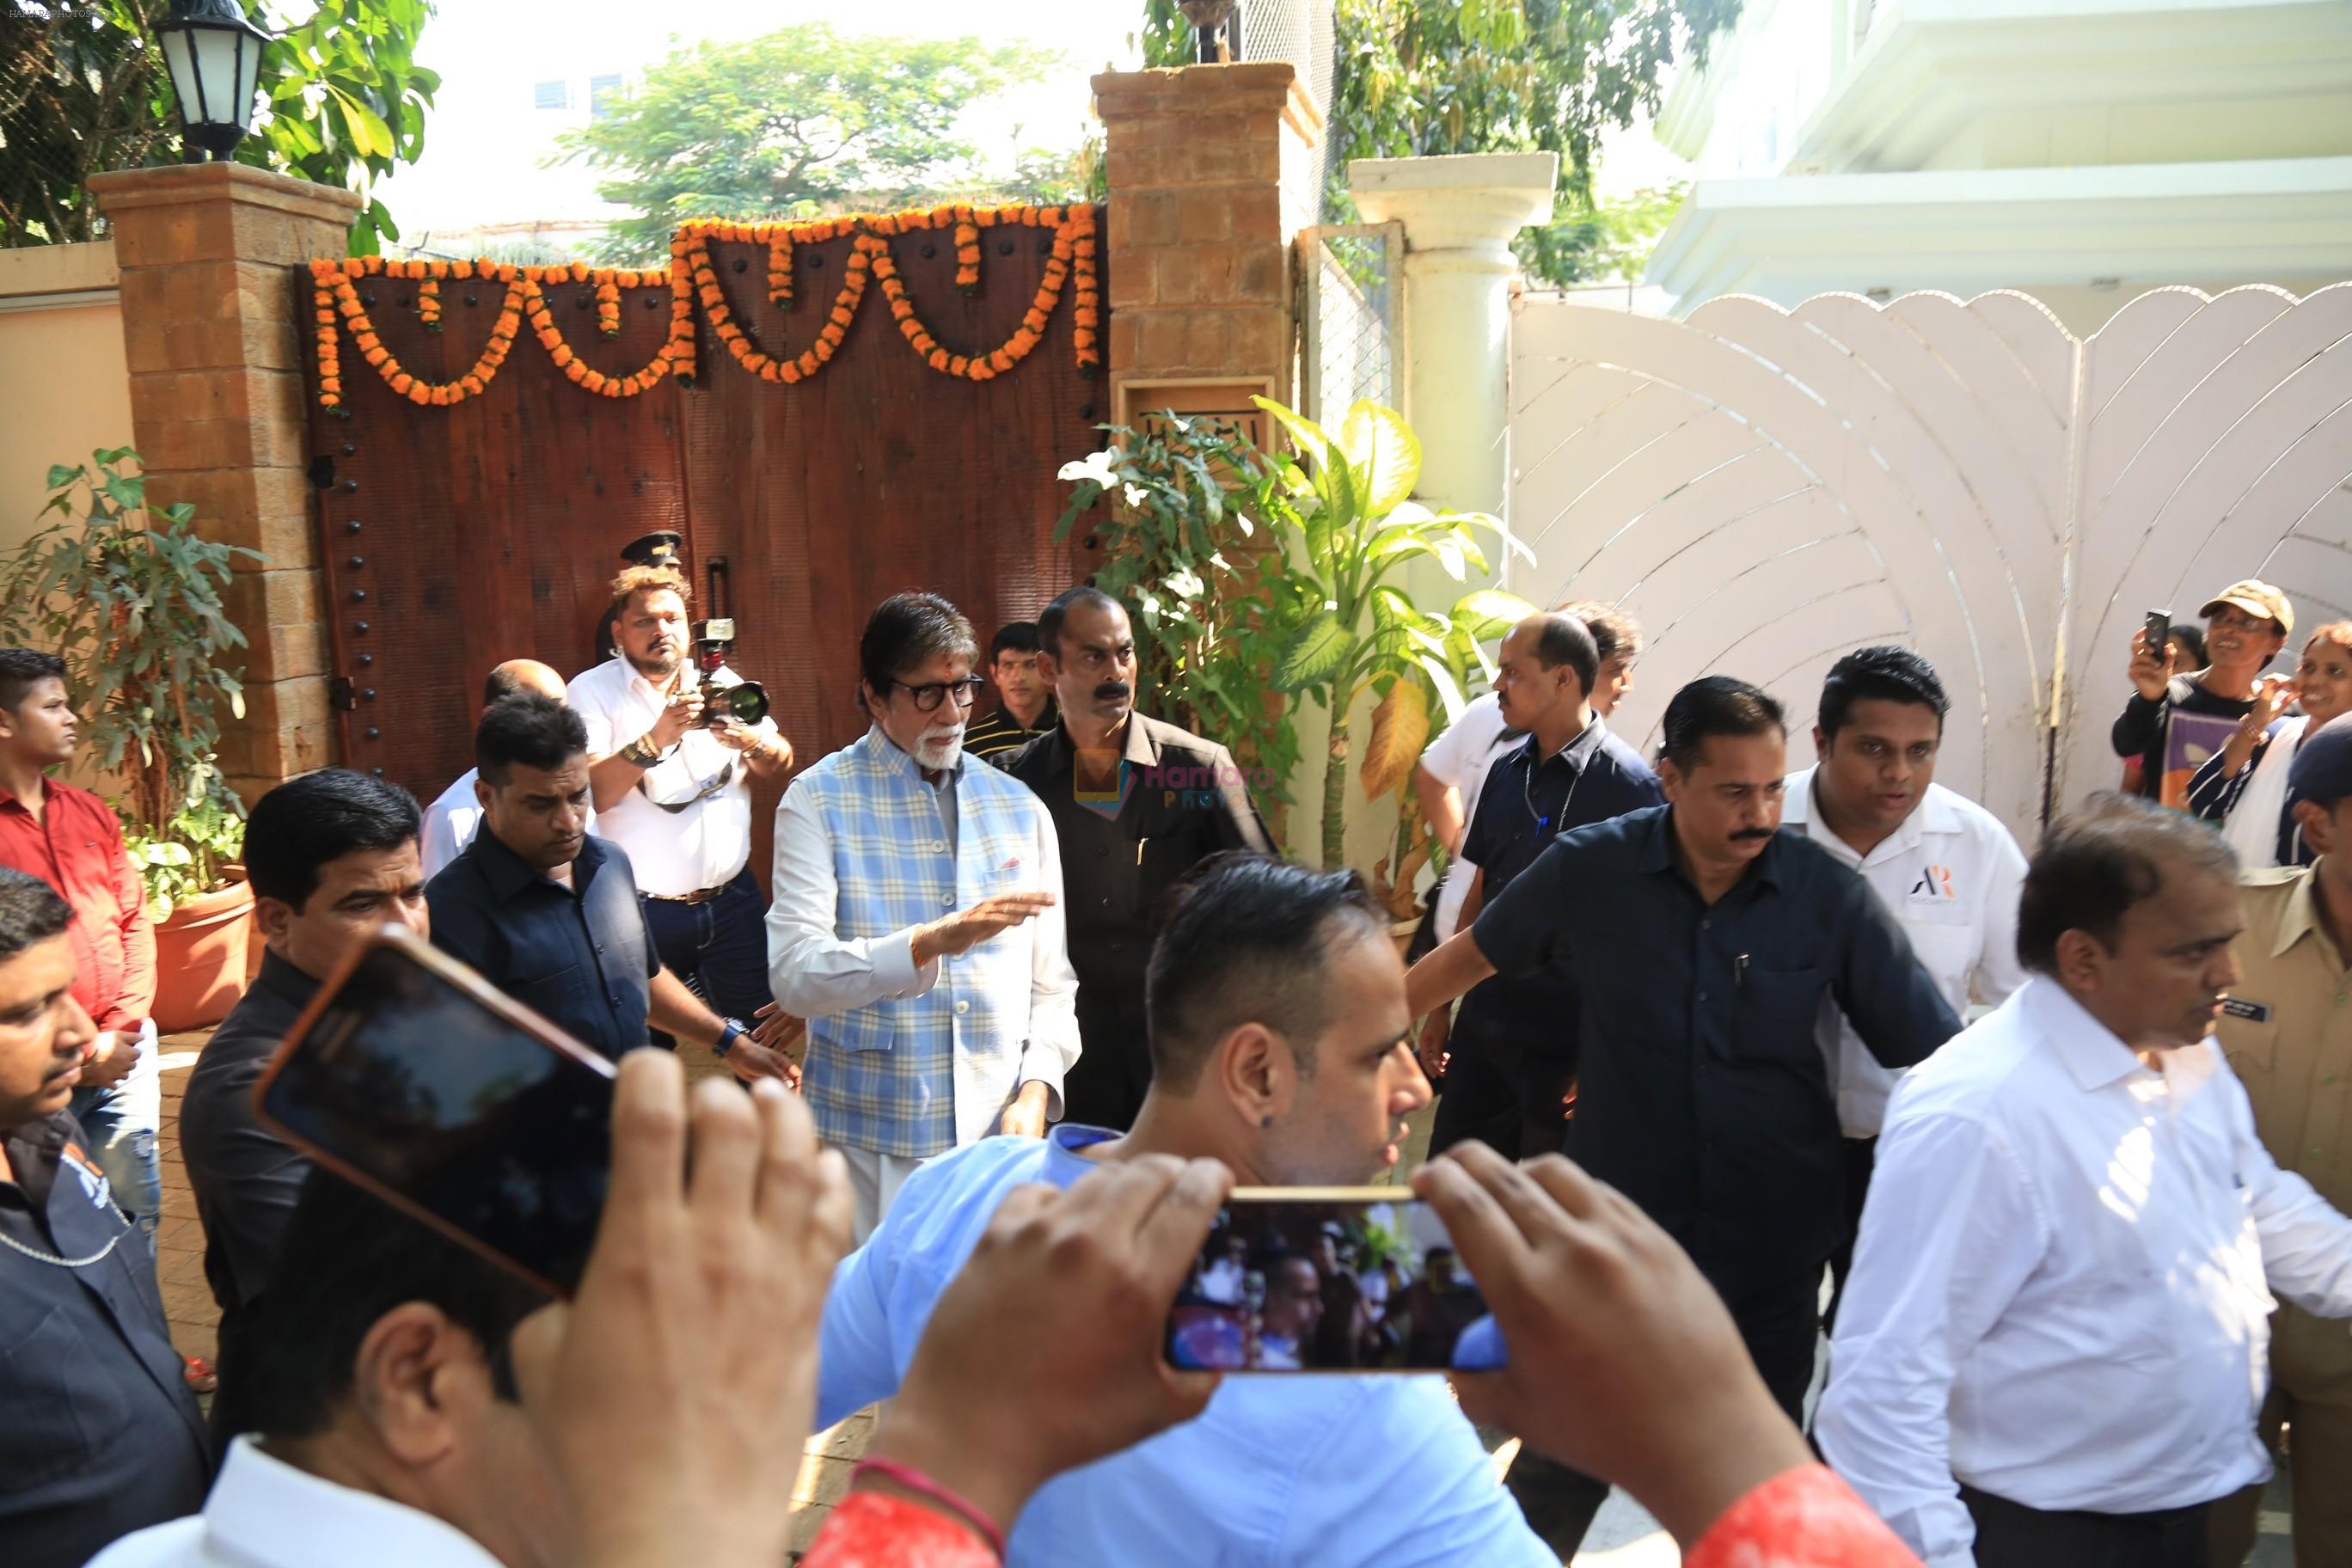 Amitabh Bachchan meets his fans outside his juhu residence on the occasion of his birthday on 10th Oct 2018